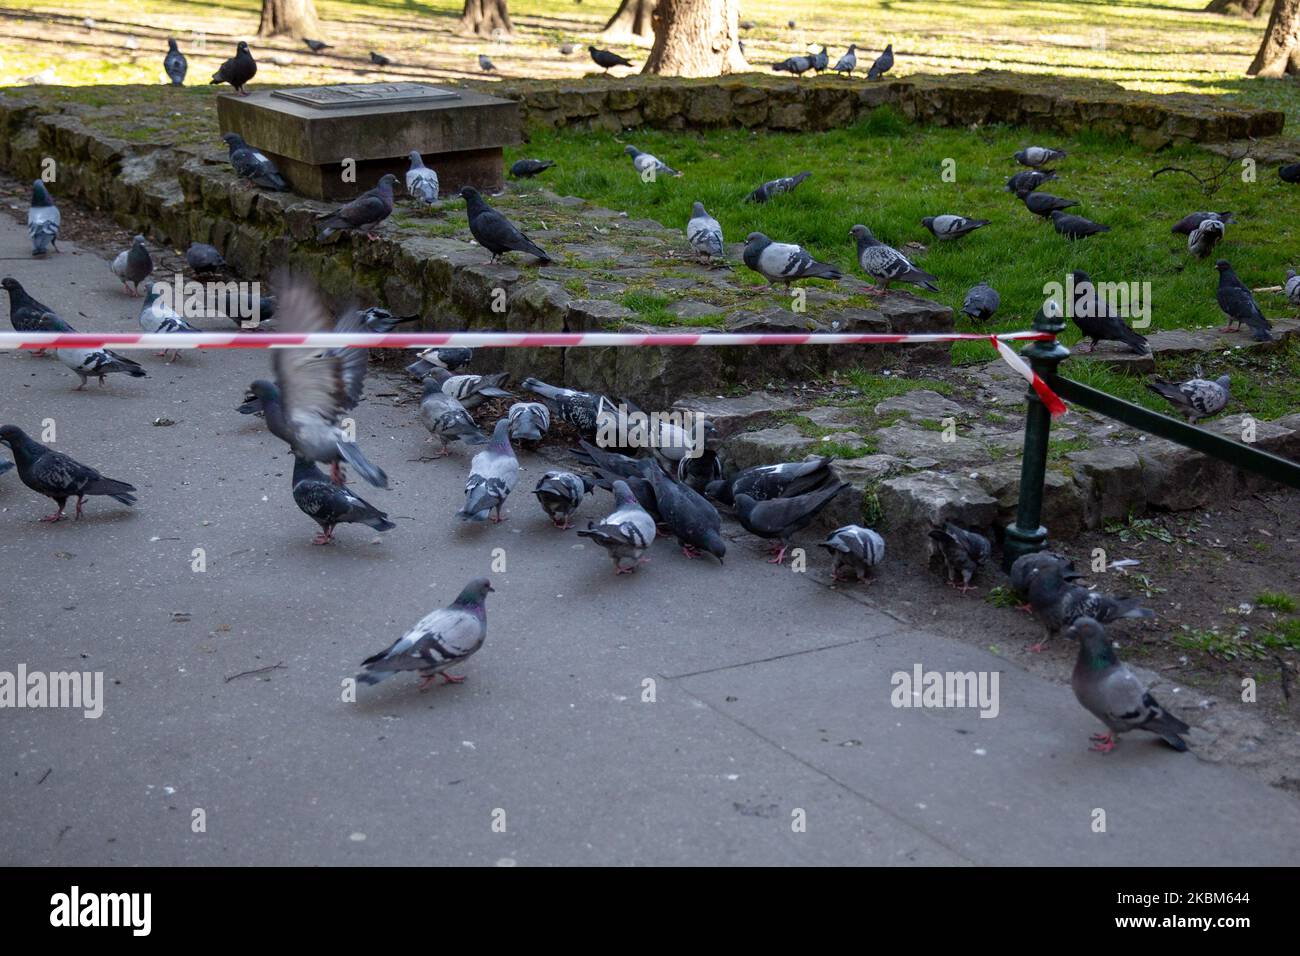 Pigeons take over public space as Planty, a famous park in a centre of Krakow is closed for public as Coronavirus pandemic grows in Poland, April 8, 2020. There are about 5200 Covid-19 cases and over 150 deaths in Poland as of April 8. To combat the spread of Covid-19 pandemic Polish government encourages public to stay home at all times, toughens regulation regarding social life. (Photo by Dominika Zarzycka/NurPhoto) Stock Photo